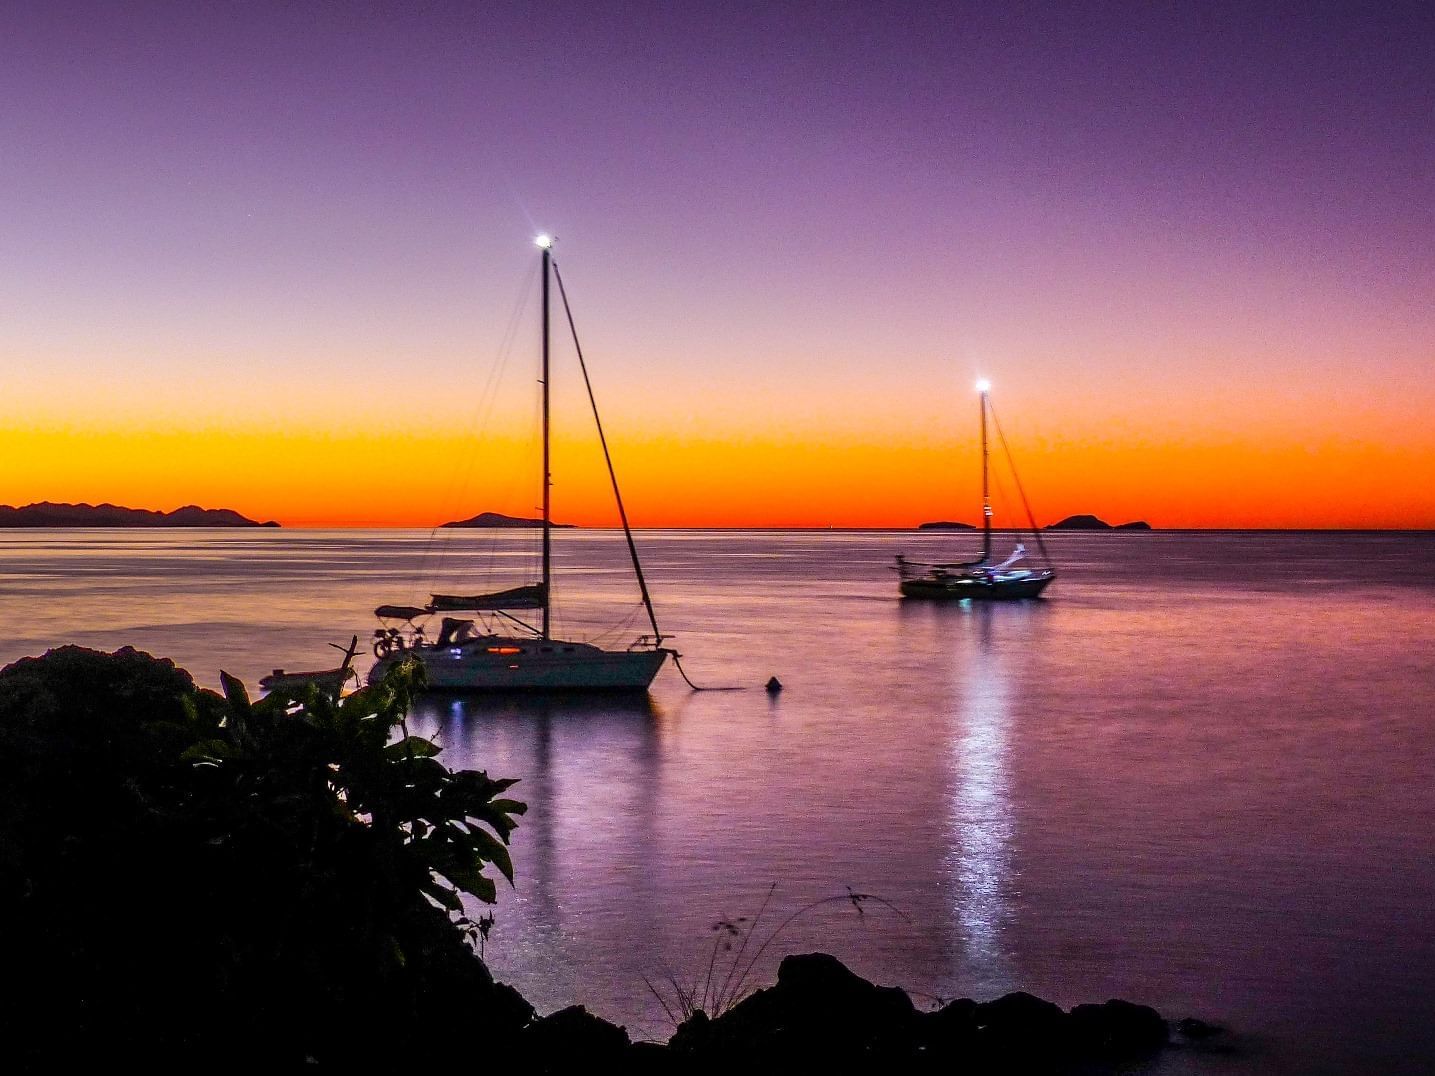 Sunset view from Lovers cove bar at Daydream Island Resort